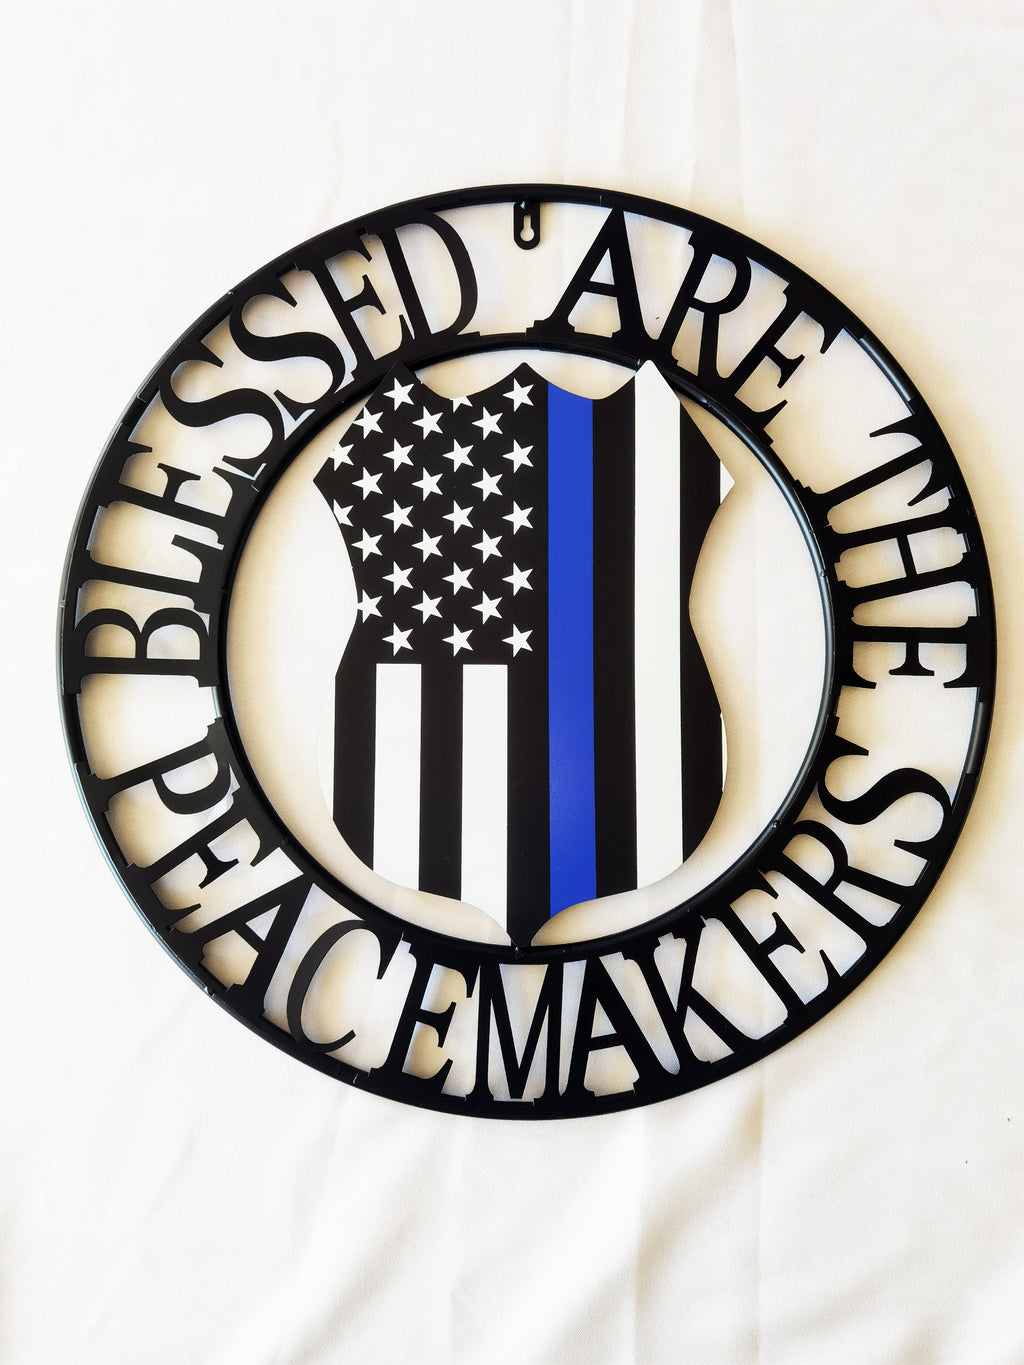 Police "Blessed are the Peacemakers" Outdoor Décor Wheel